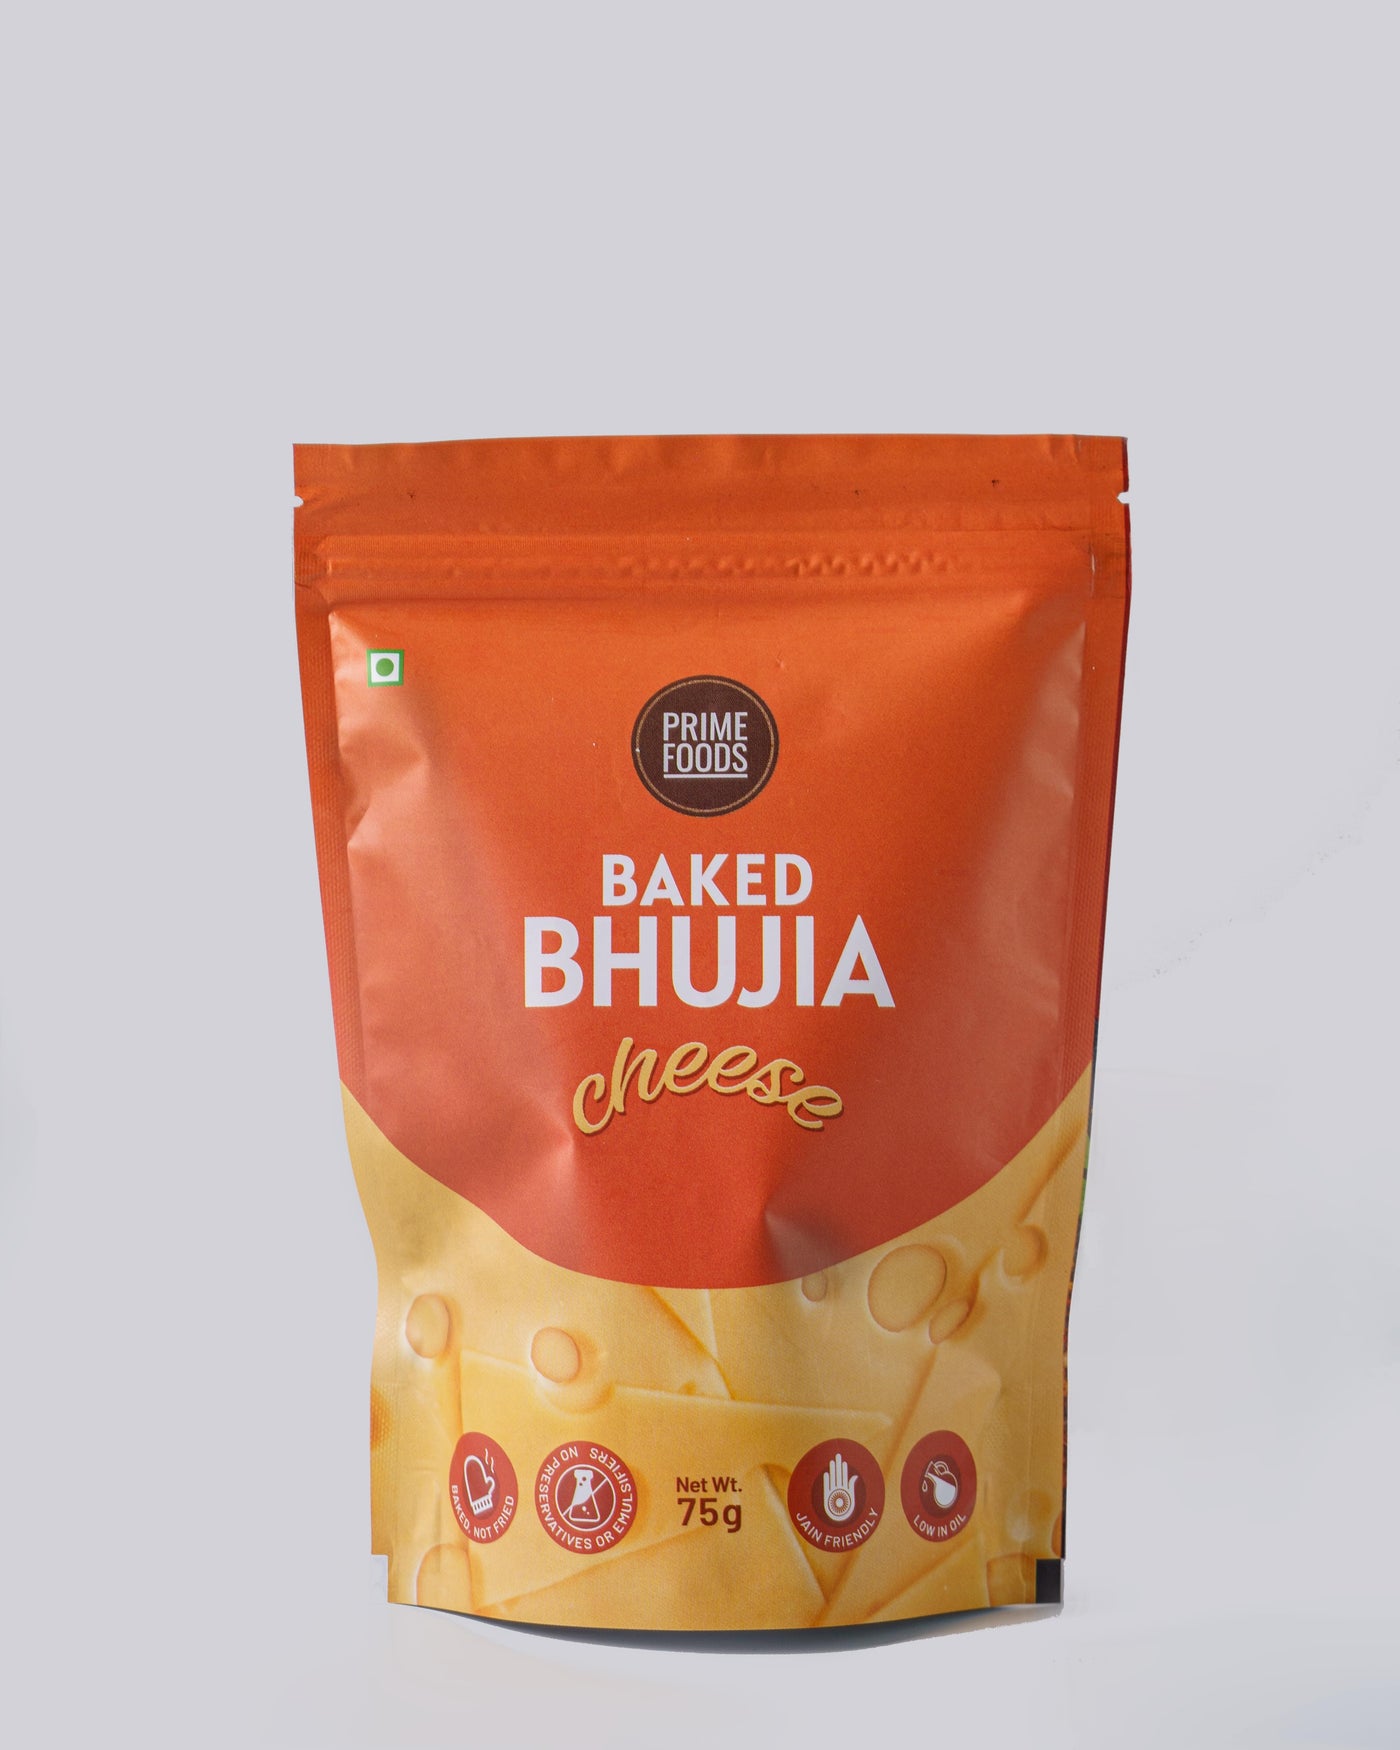 Baked Bhujia: Cheese (pack of 3) (3x75g)